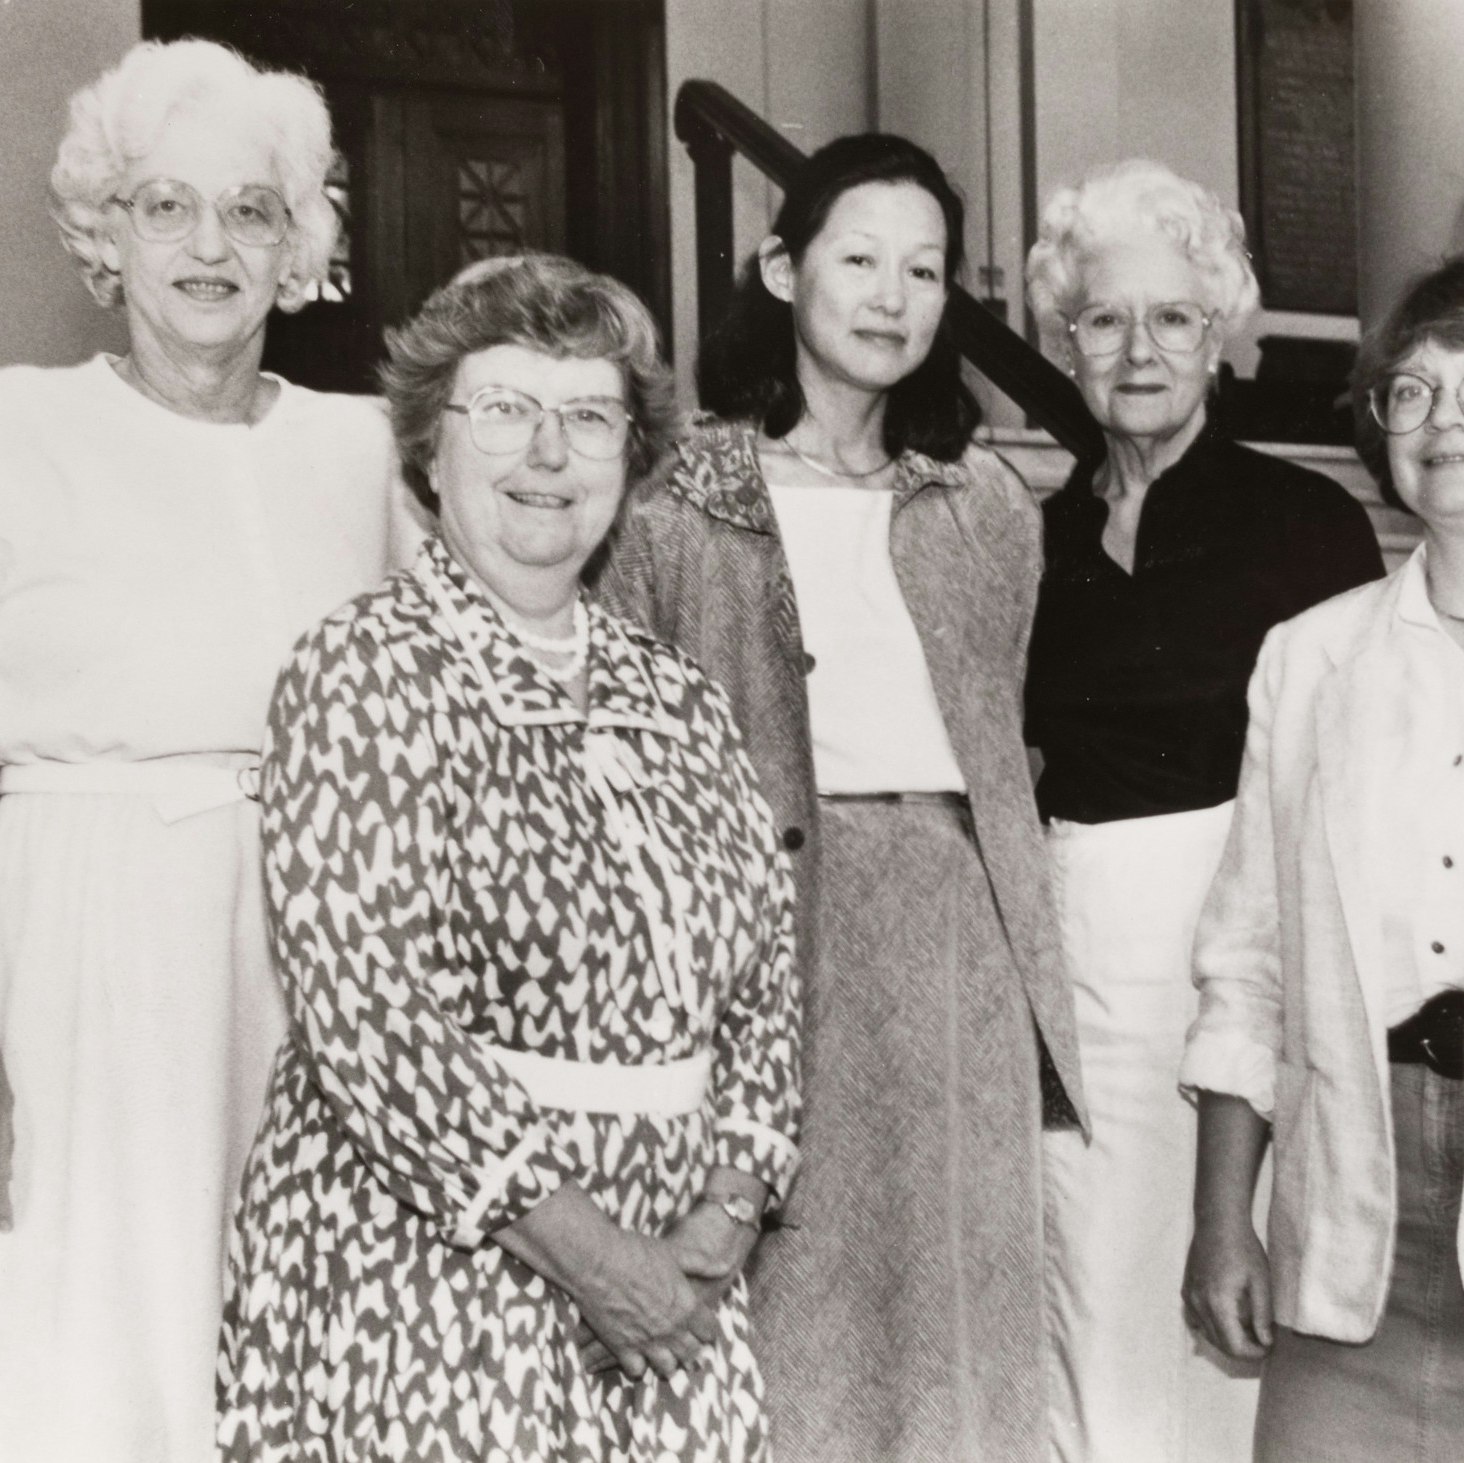 Sepia toned group photo of Harvard Professors, from left to right: Elizabeth Hay, Mary Ellen Avery, Alice Huang, Lynn Reed, Priscilla Schaffer